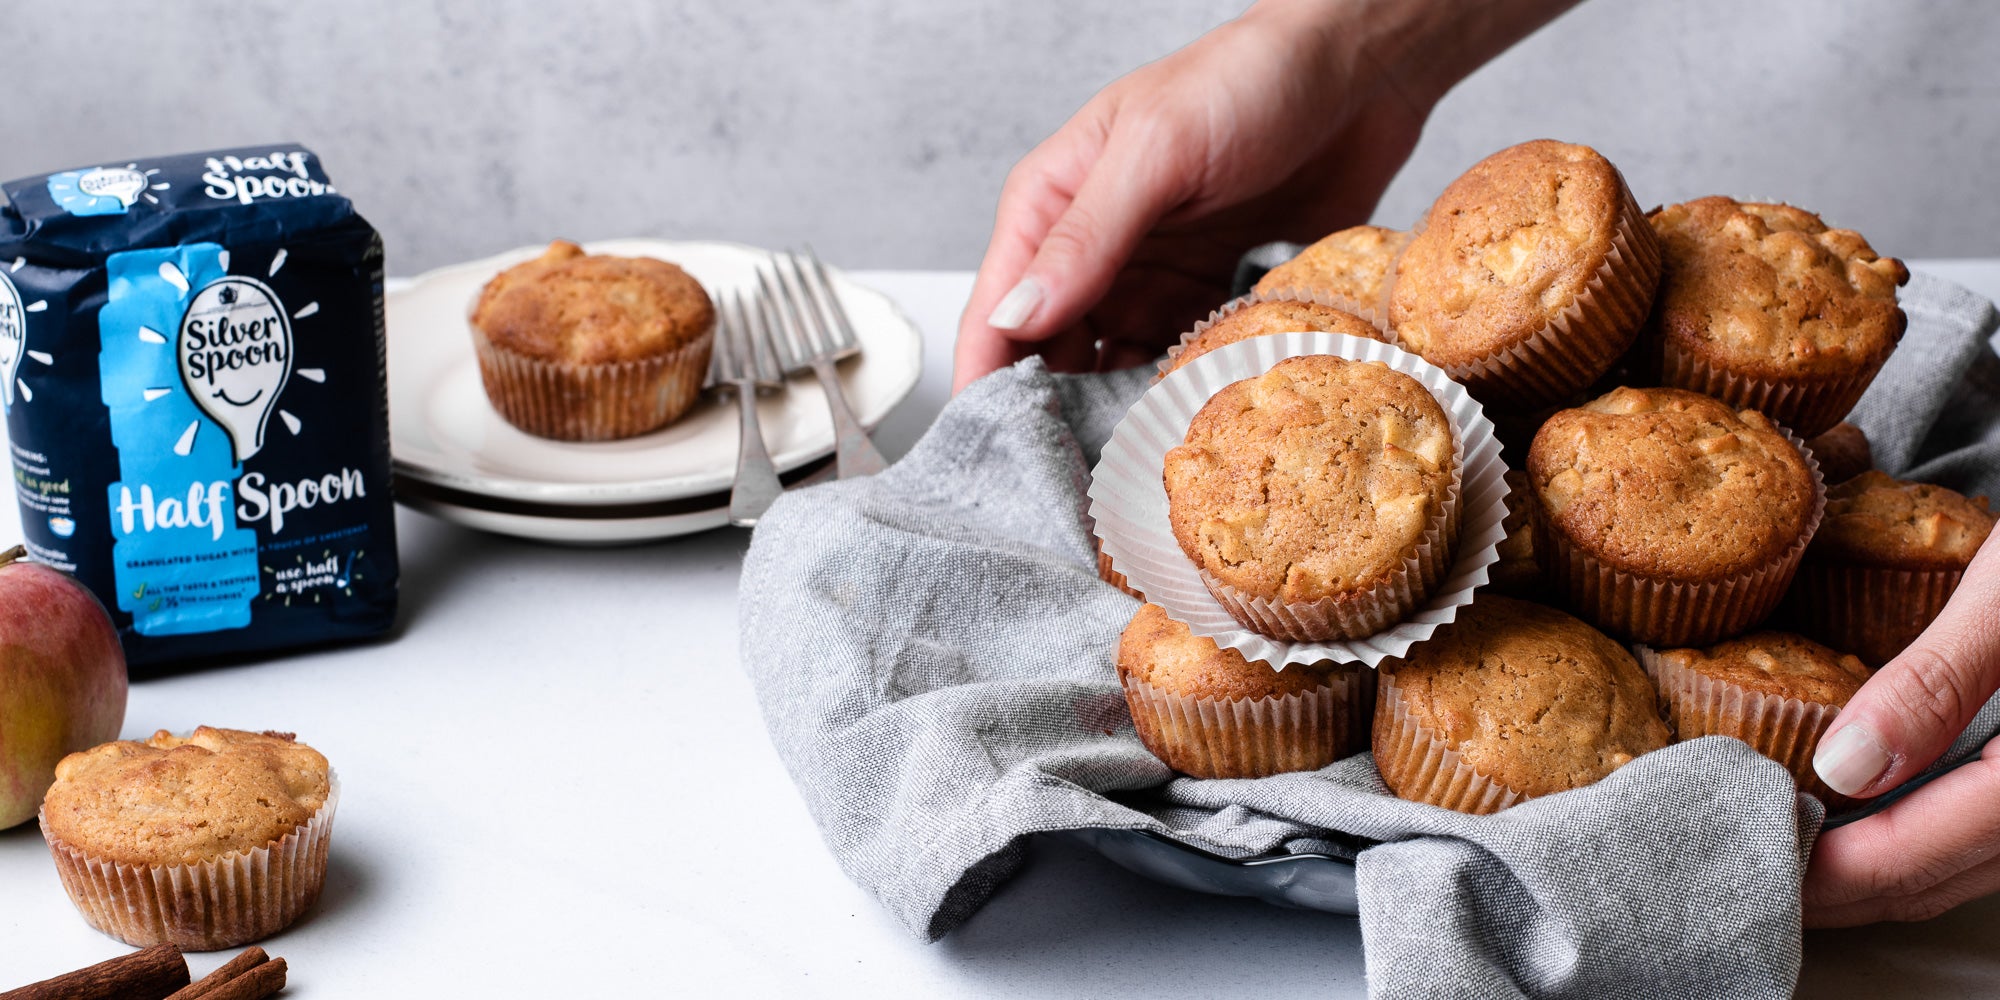 Calorie Conscious Apple & Cinnamon Muffins being held on a plate, with a bag of Silver Spoon Half Spoon sugar